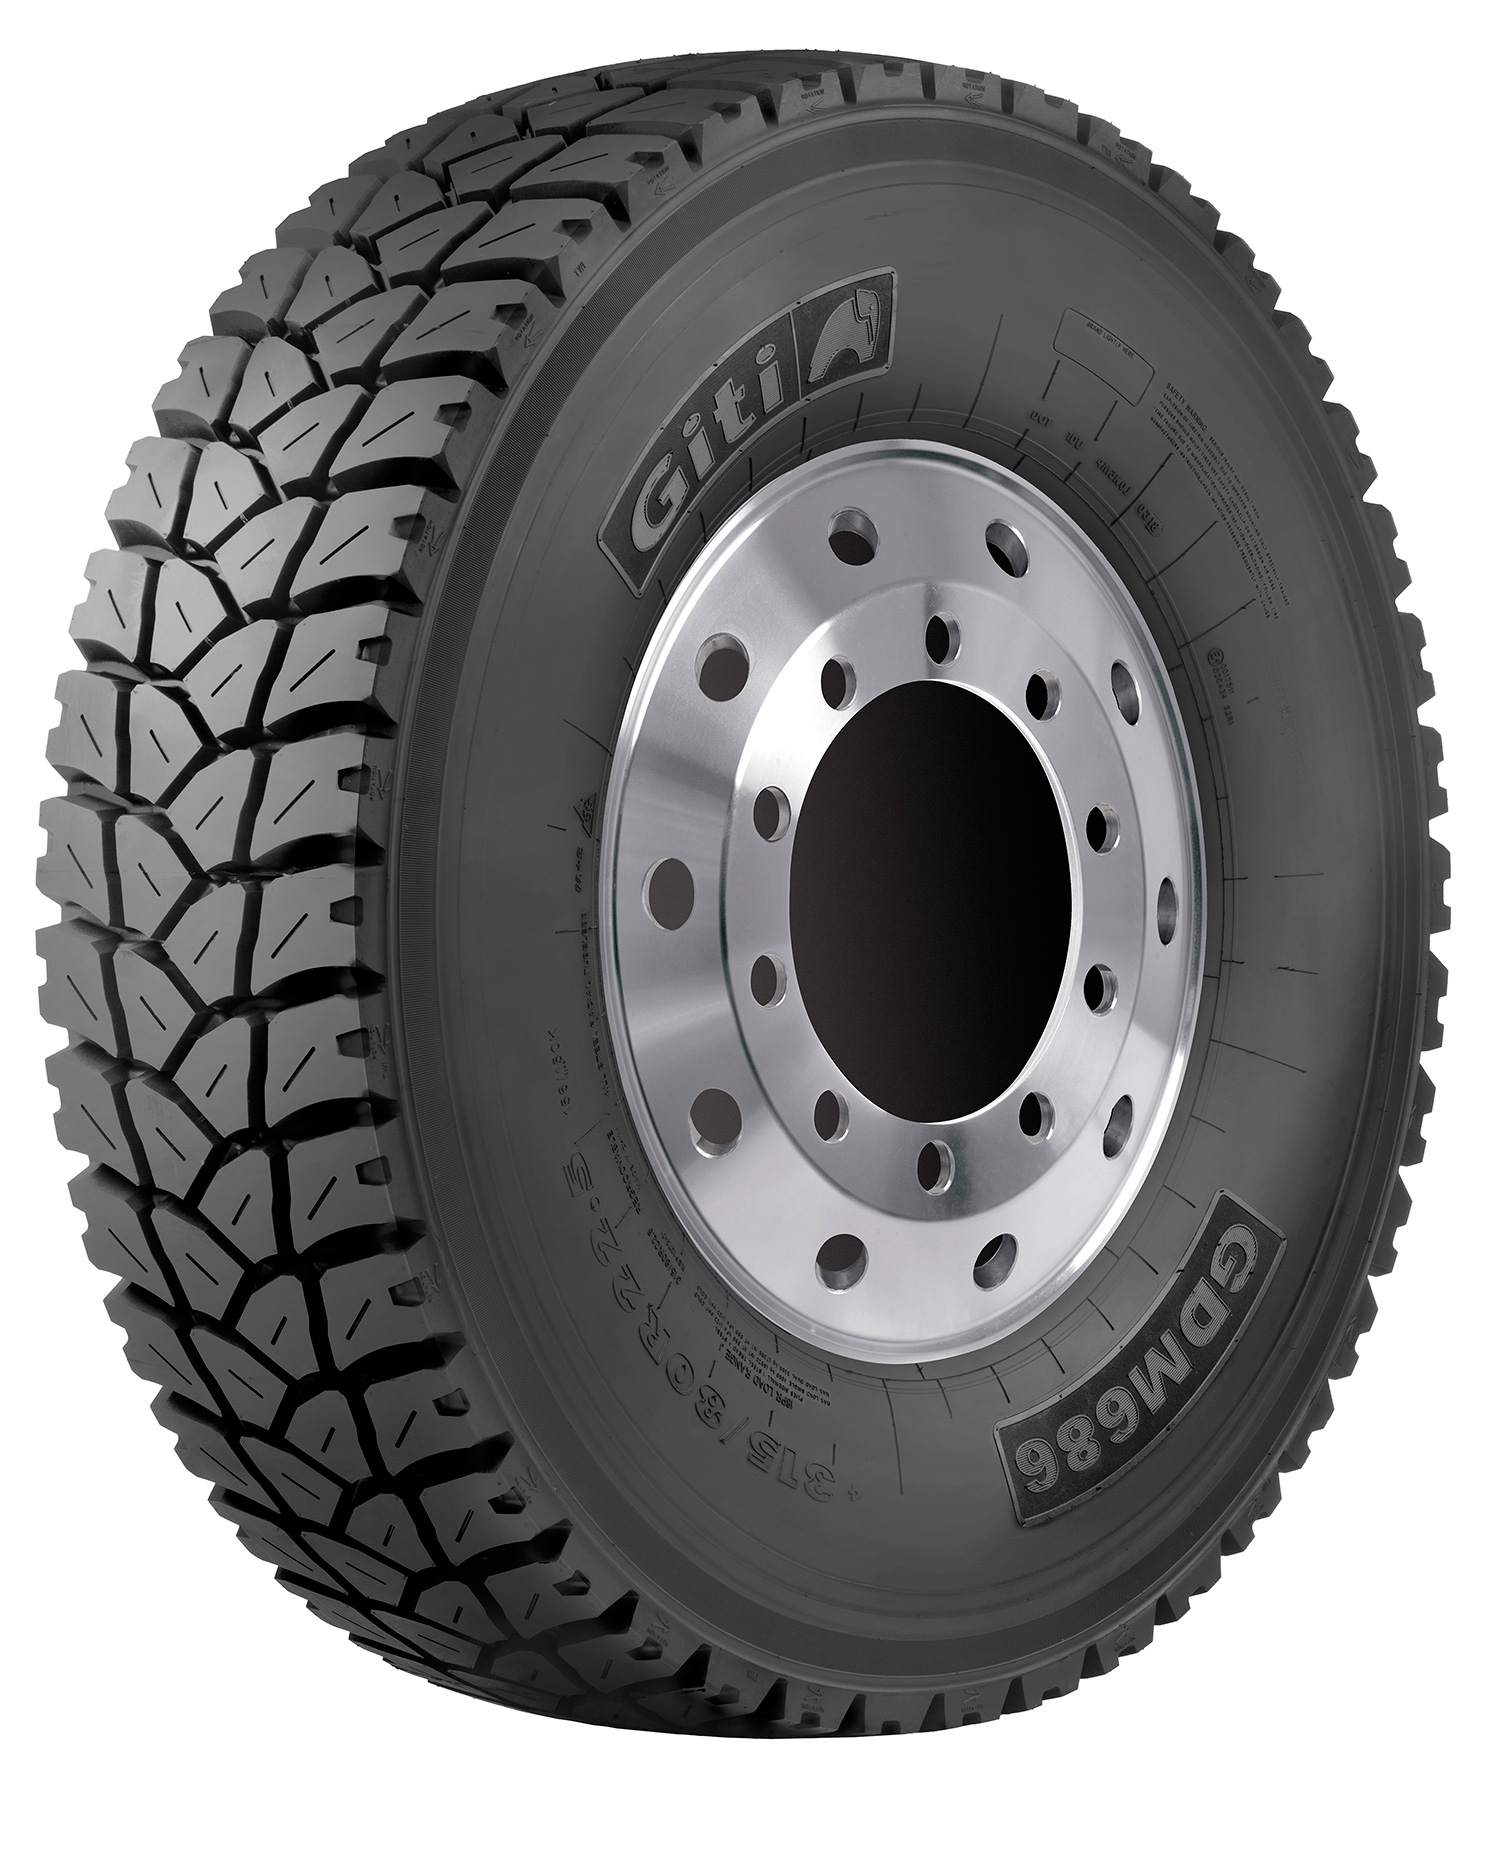 GDM686 Drive Position Mixed Service Truck Tire